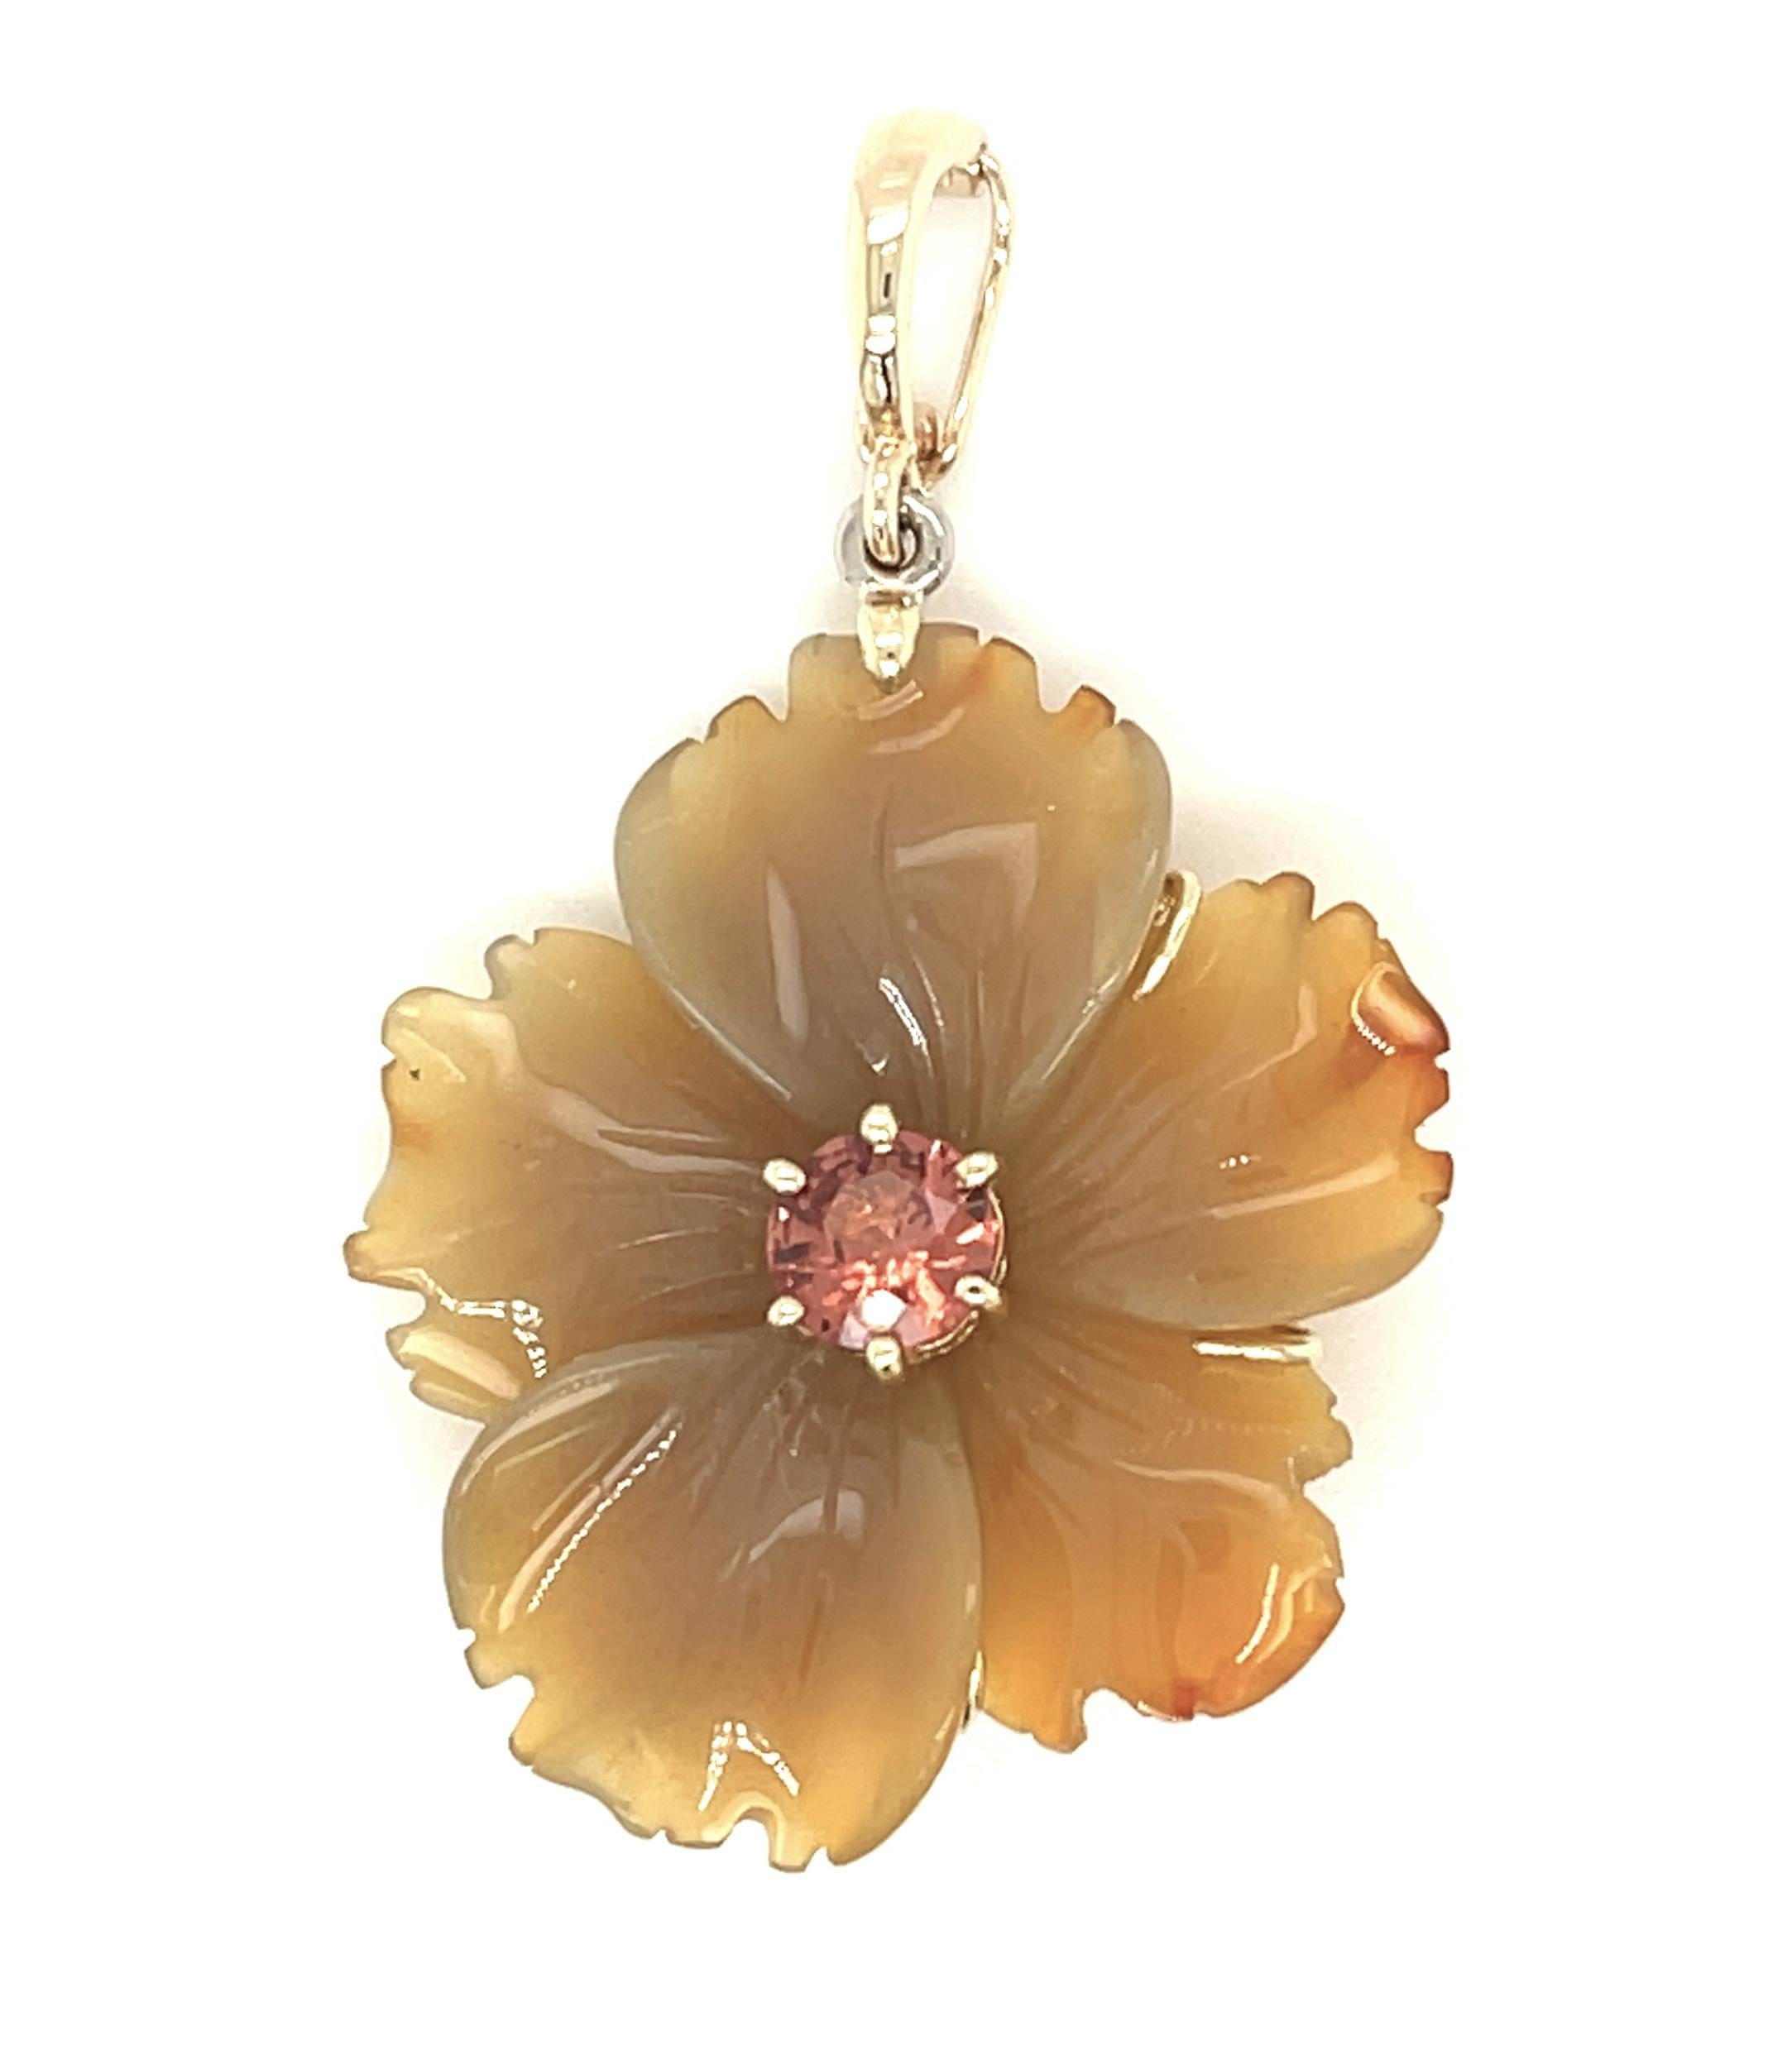 This finely hand carved agate flower necklace is a conversation piece and  wonderful way to add interest to your wardrobe. The agate flower has subtle color variations of tan and amber that make this beautifully three-dimensional flower look even